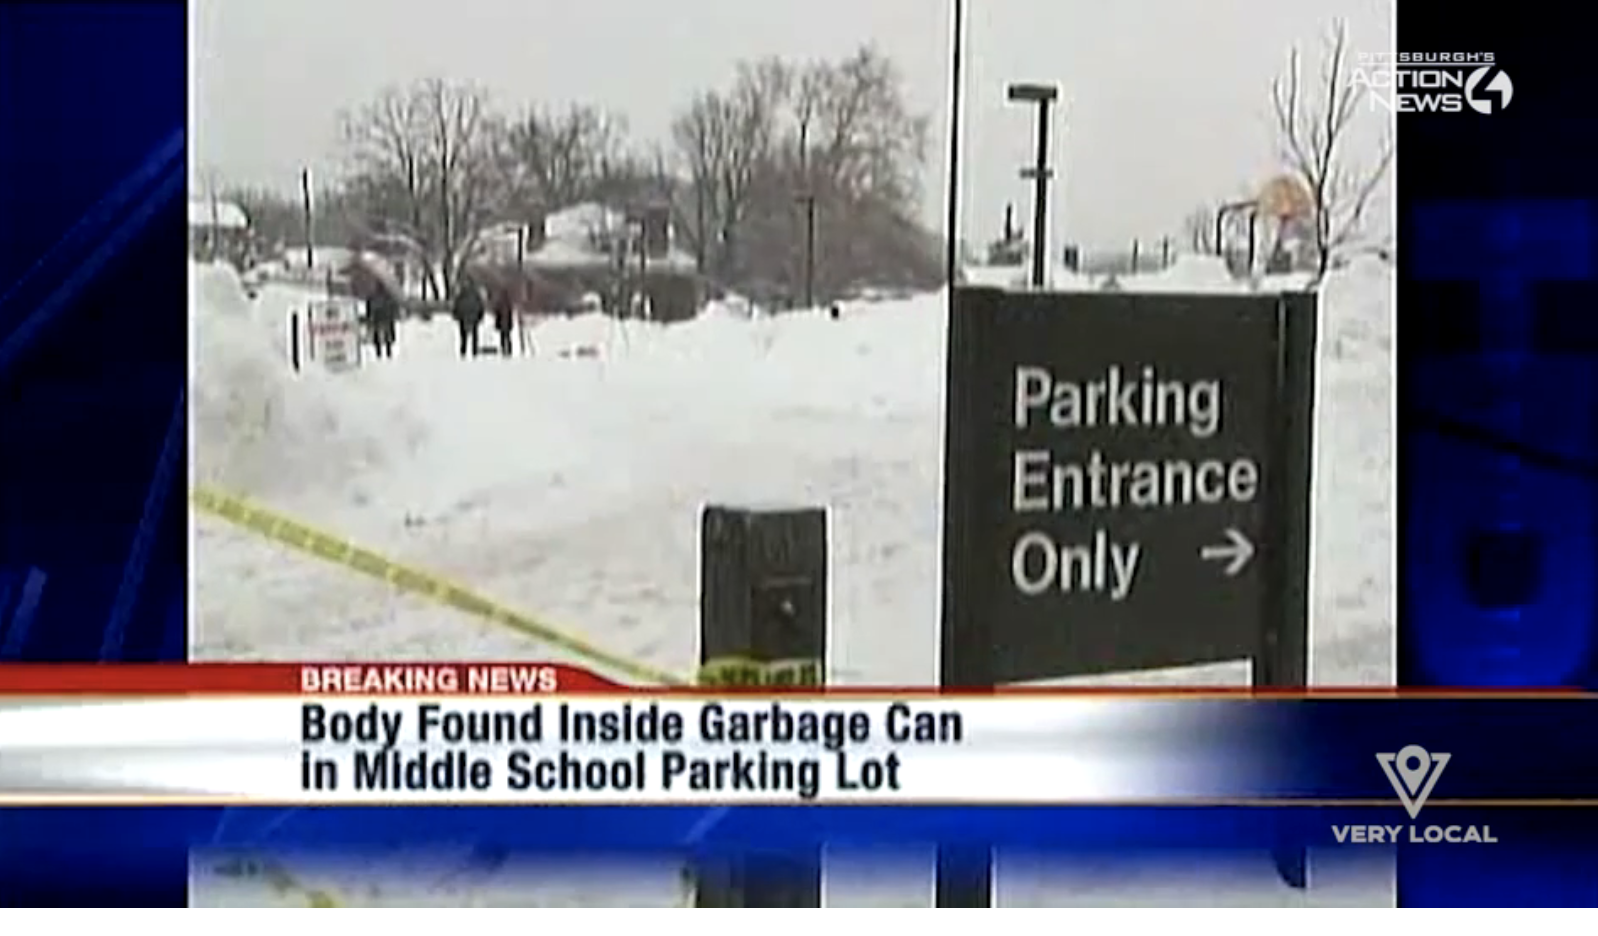 &quot;Body found inside garbage can in middle school parking lot&quot;